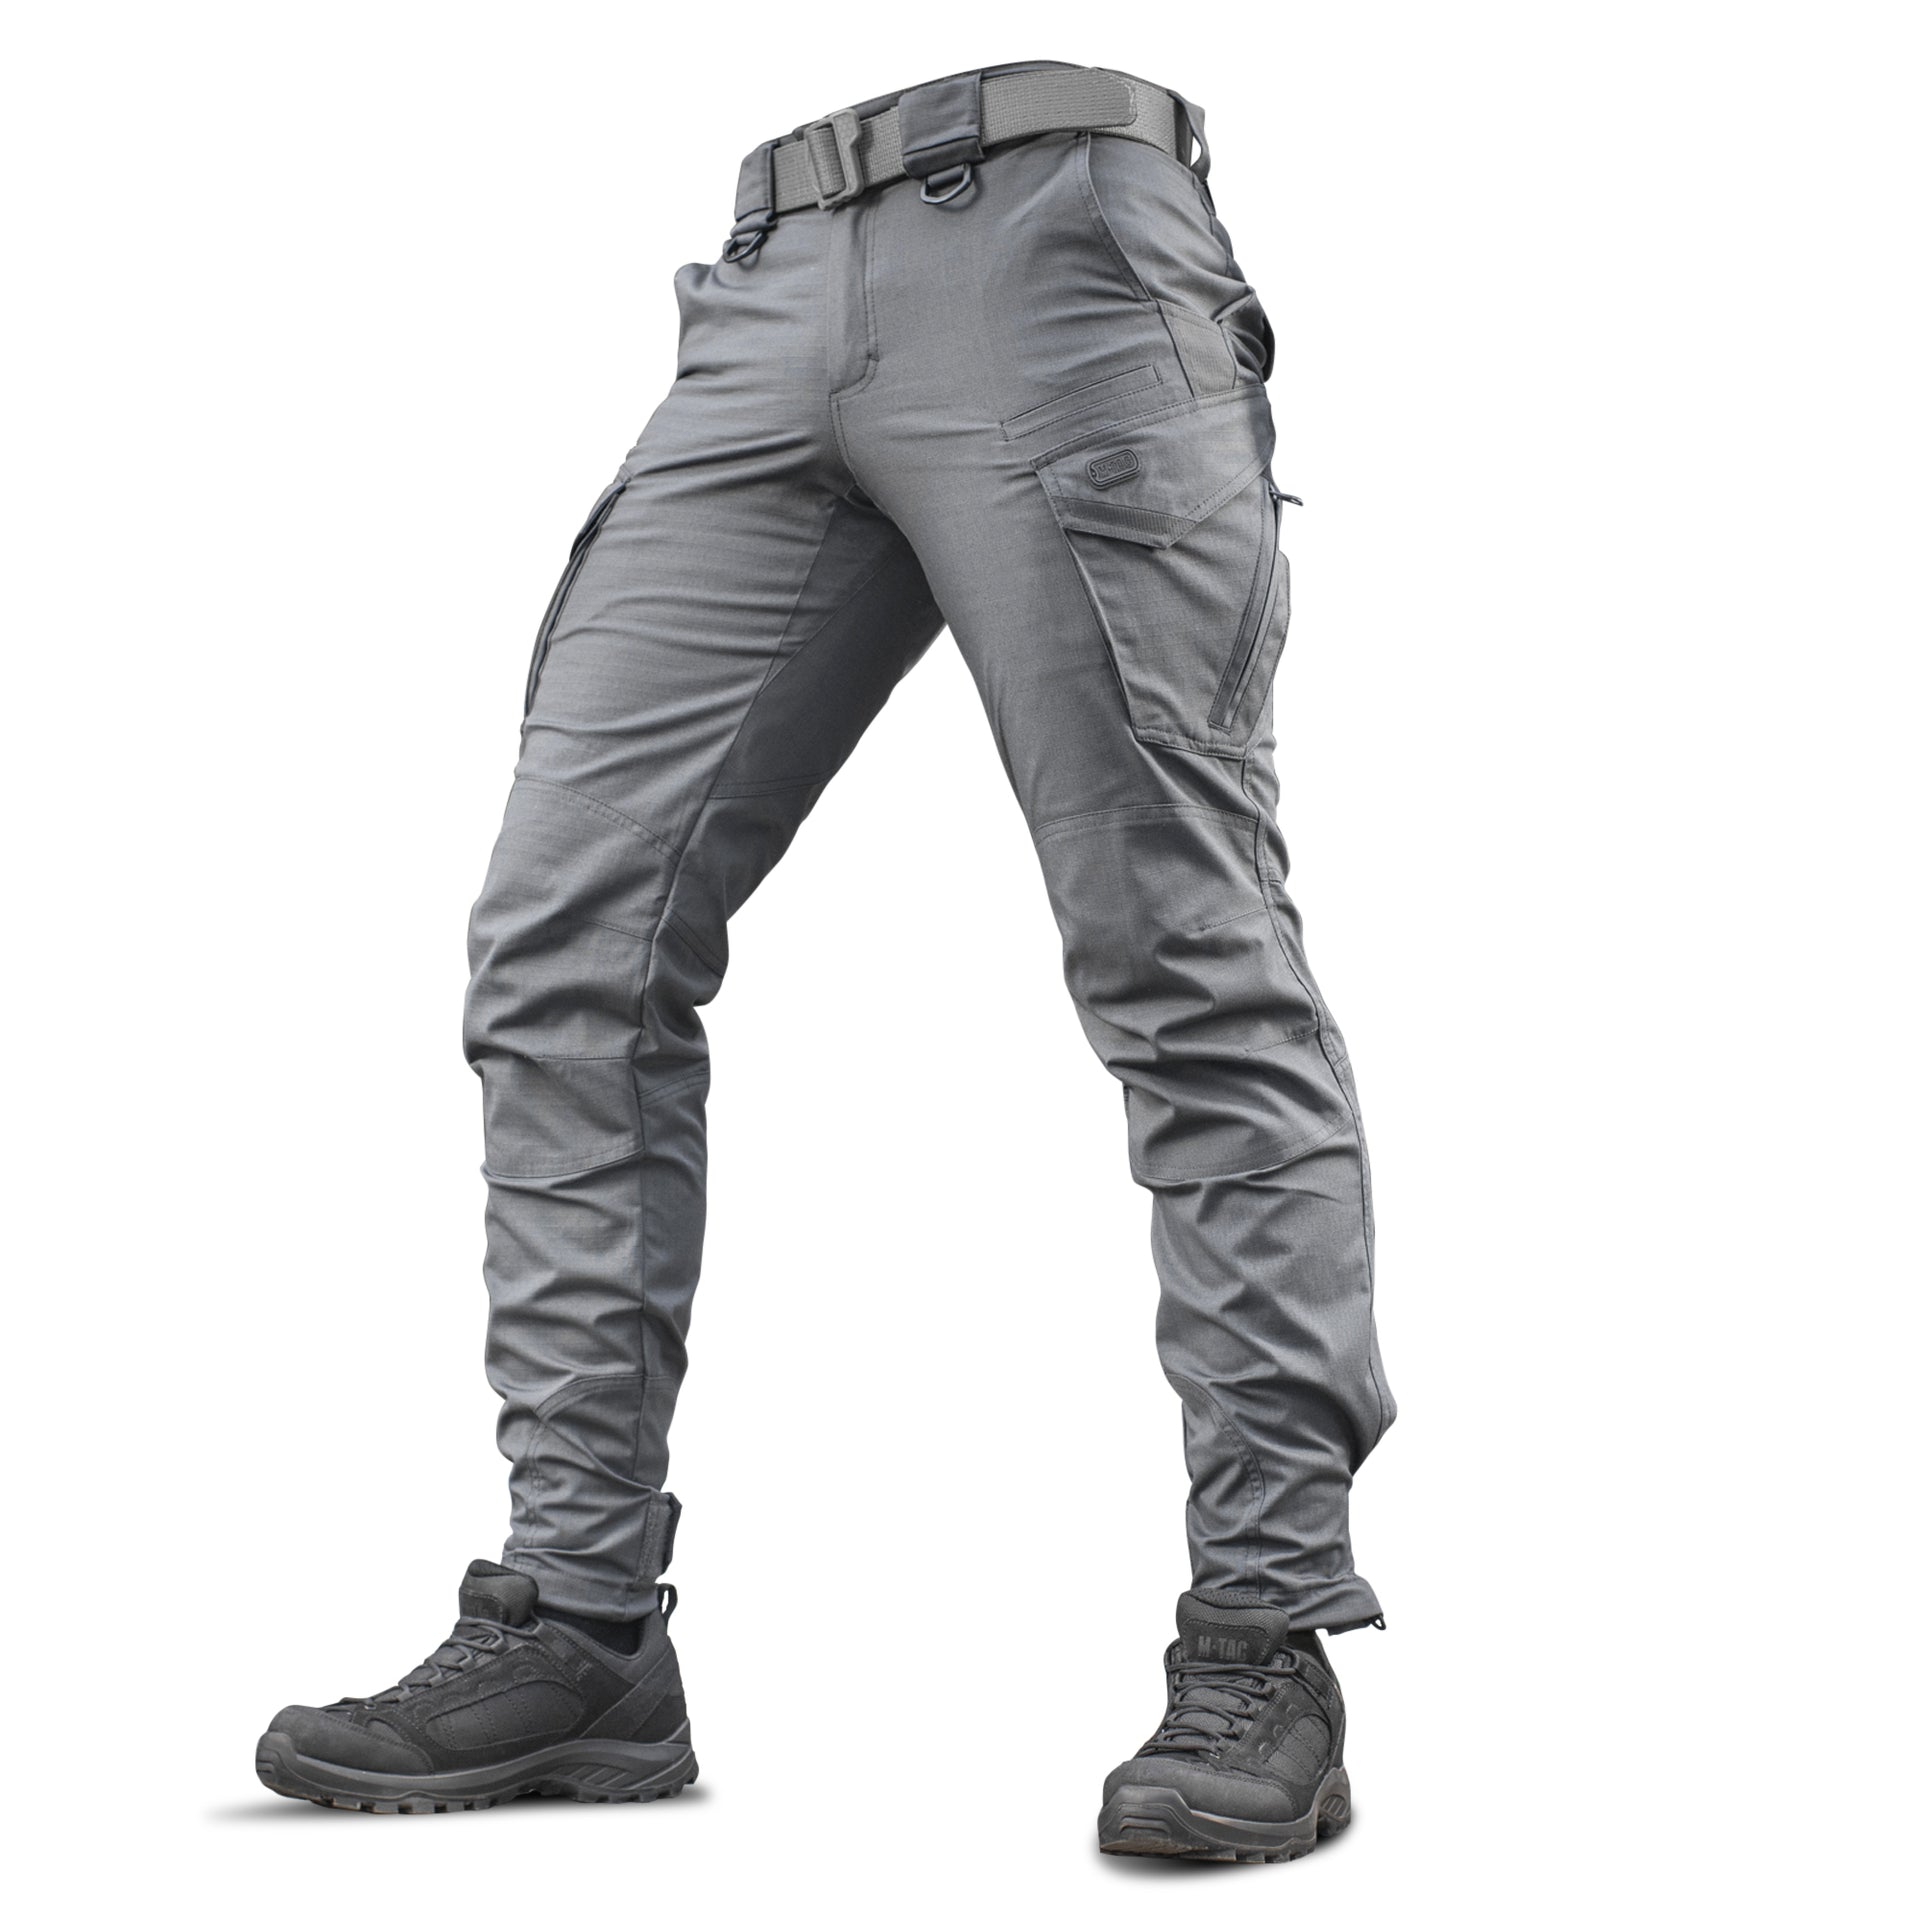 Youth Coyote Tactical Combat Pants